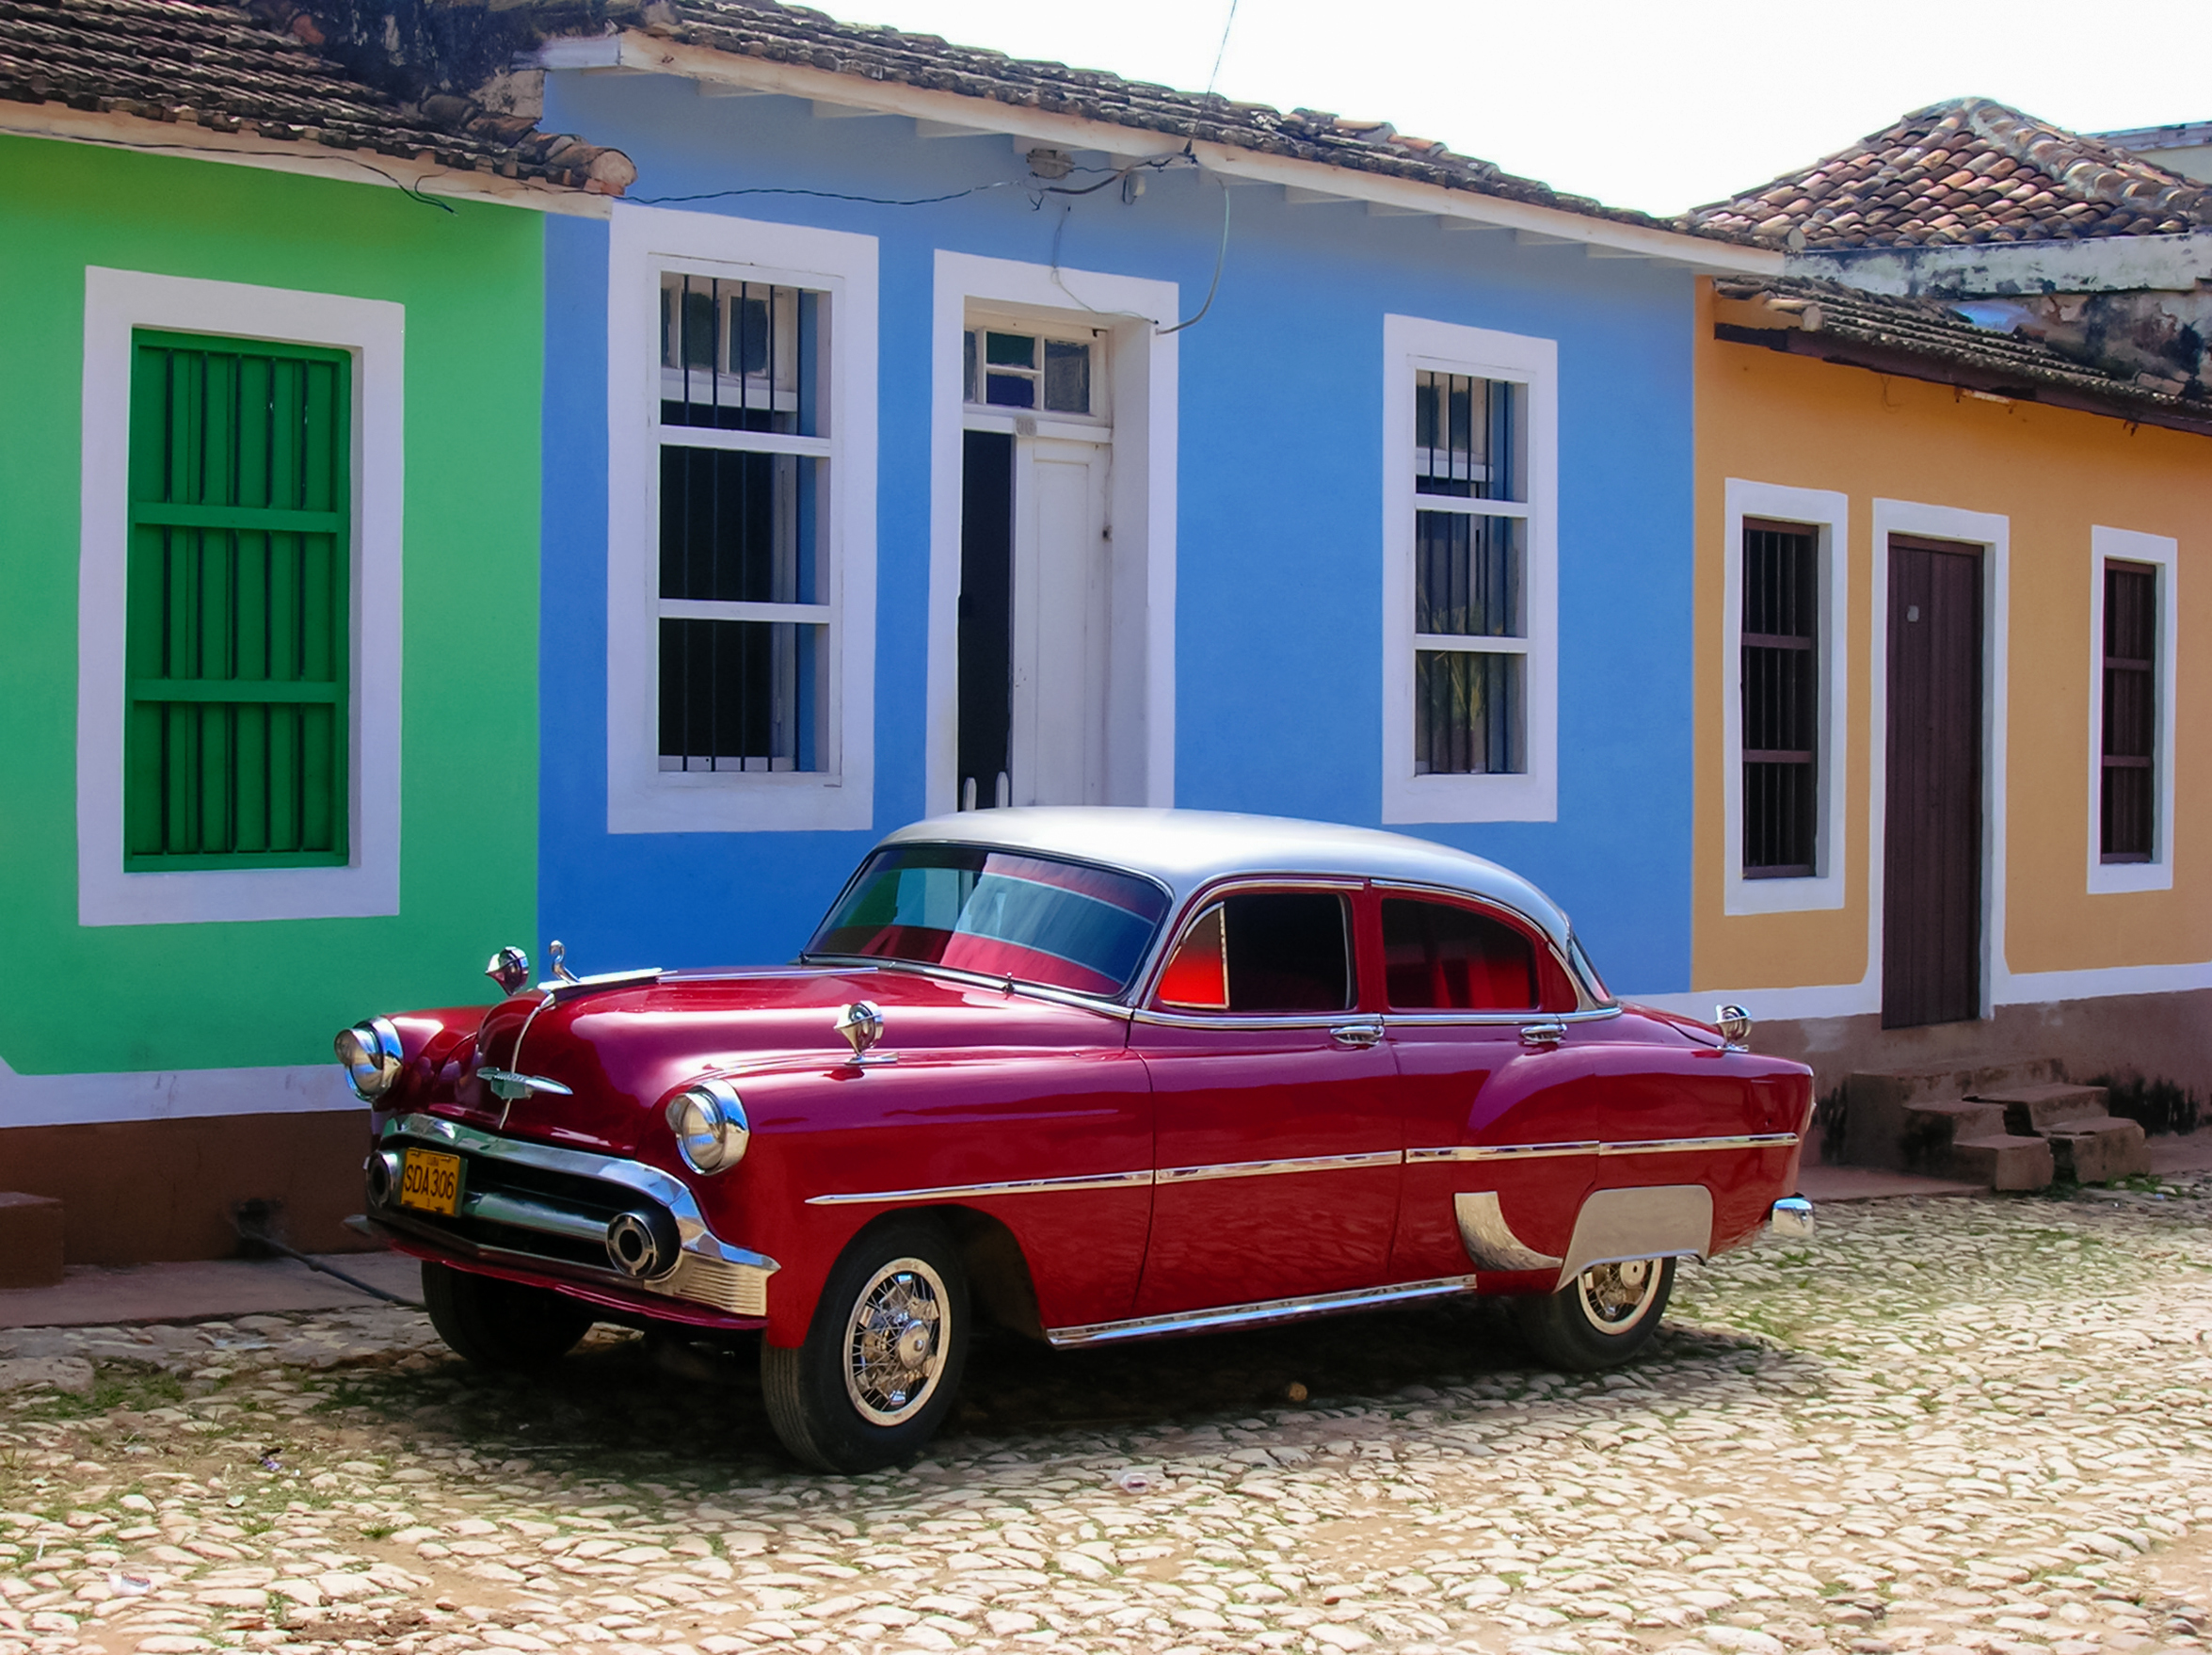 New Travel Restrictions For Cuba, Awesome Volcanoes And More Cheap Flights To Europe